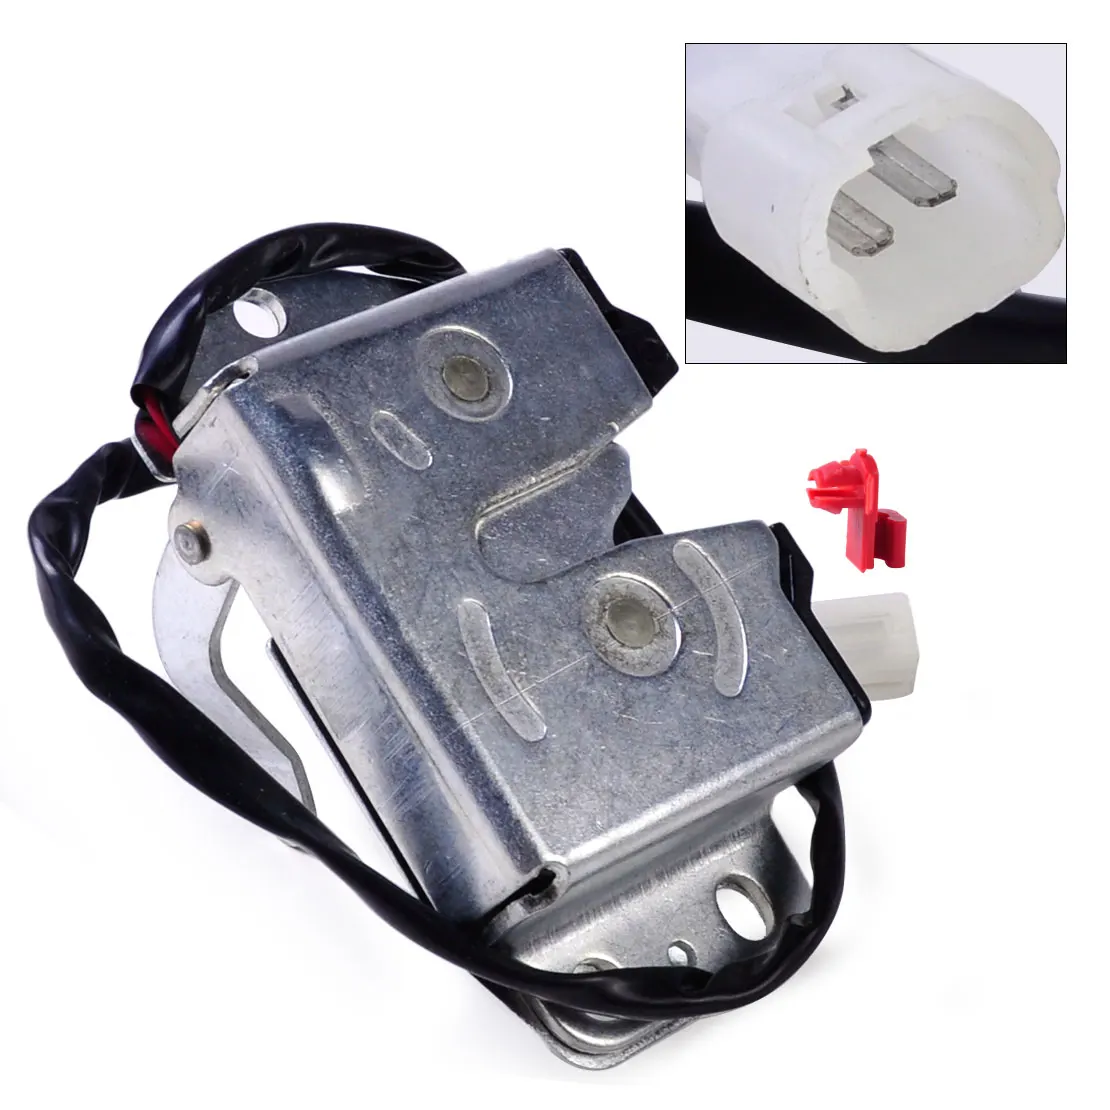 Image New Tailgate Rear Back Door Lock Latch Replacement 69350 95J01 Fit for Toyota Hiace 1990 1991 1992 1993 1994 For Dyna